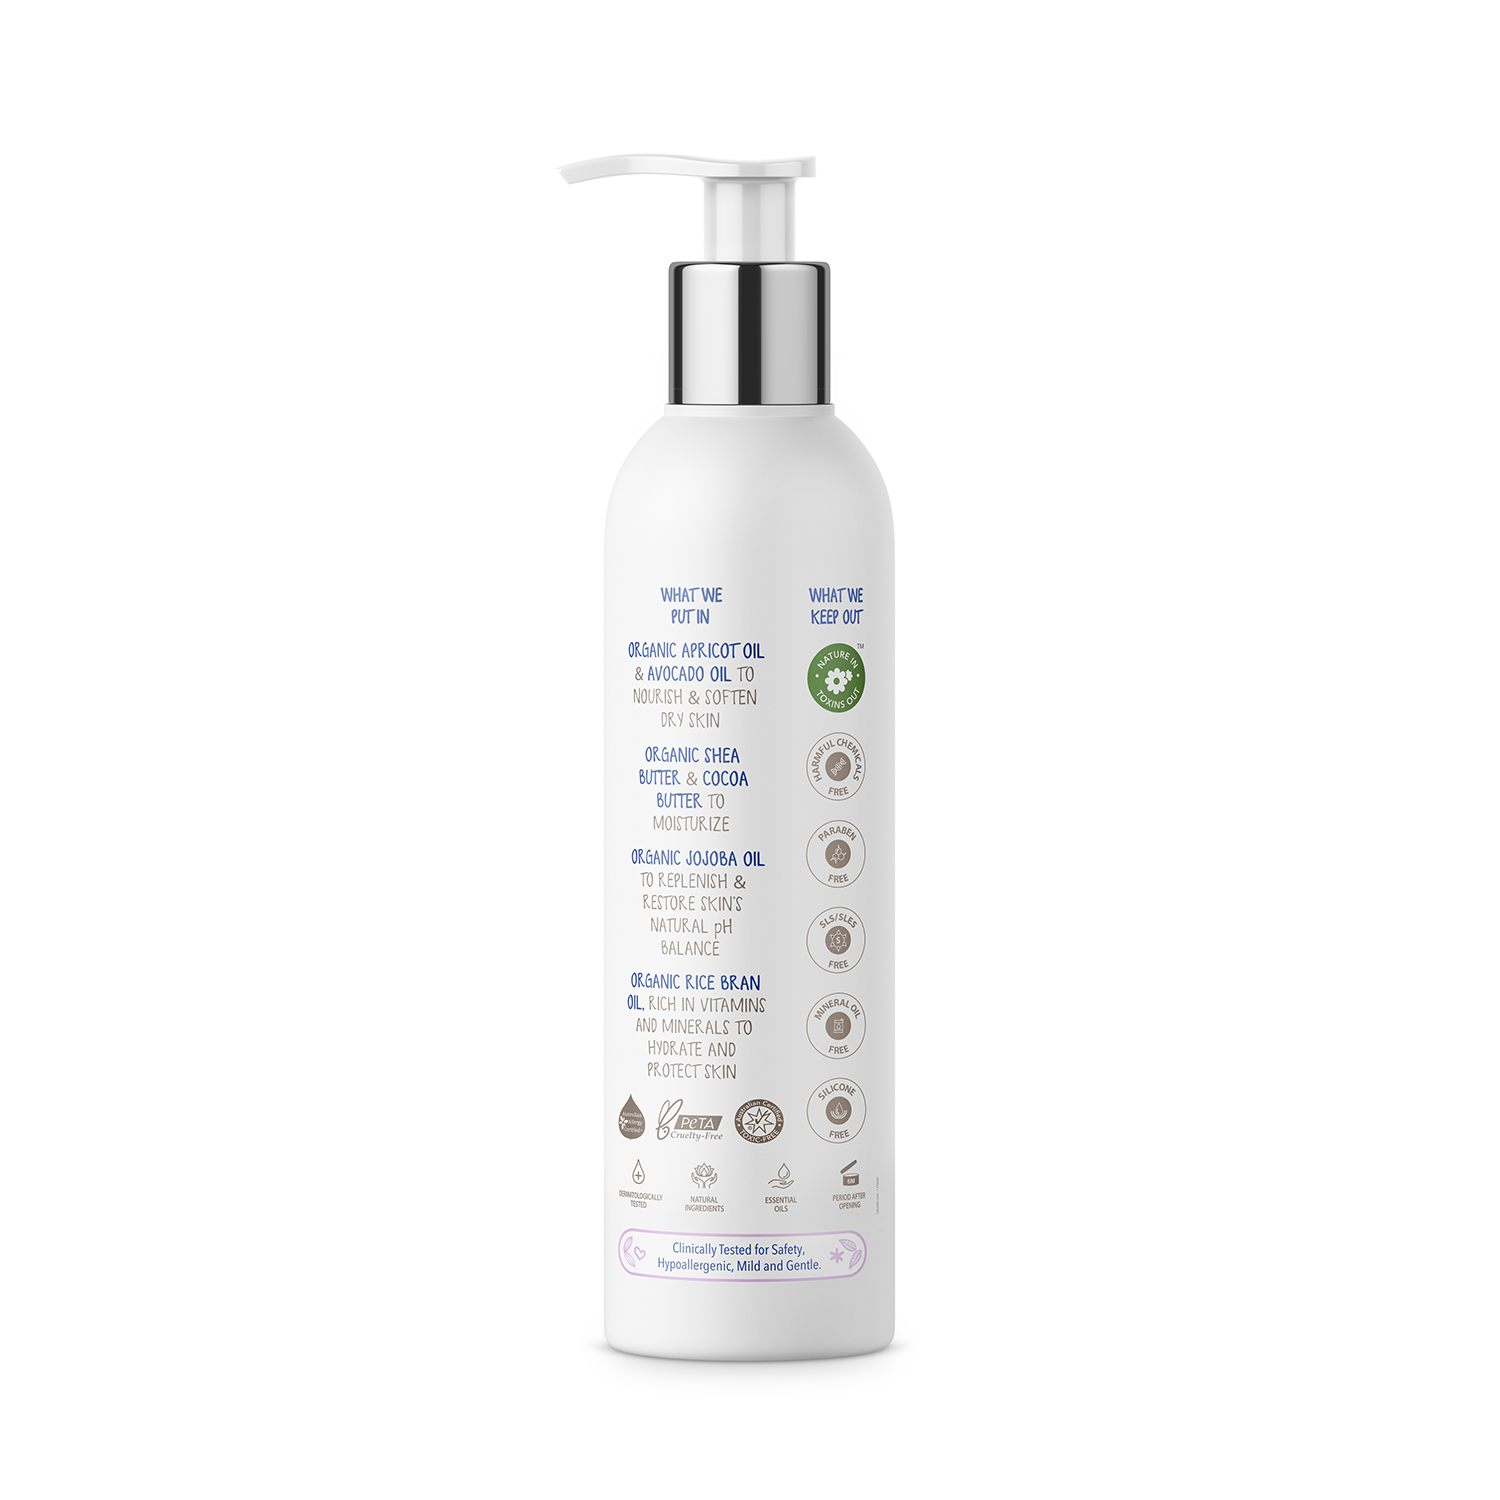 The Moms Co. Natural Baby Lotion | Australia-Certified | With Organic Apricot, Organic Jojoba and Organic Rice Bran Oils